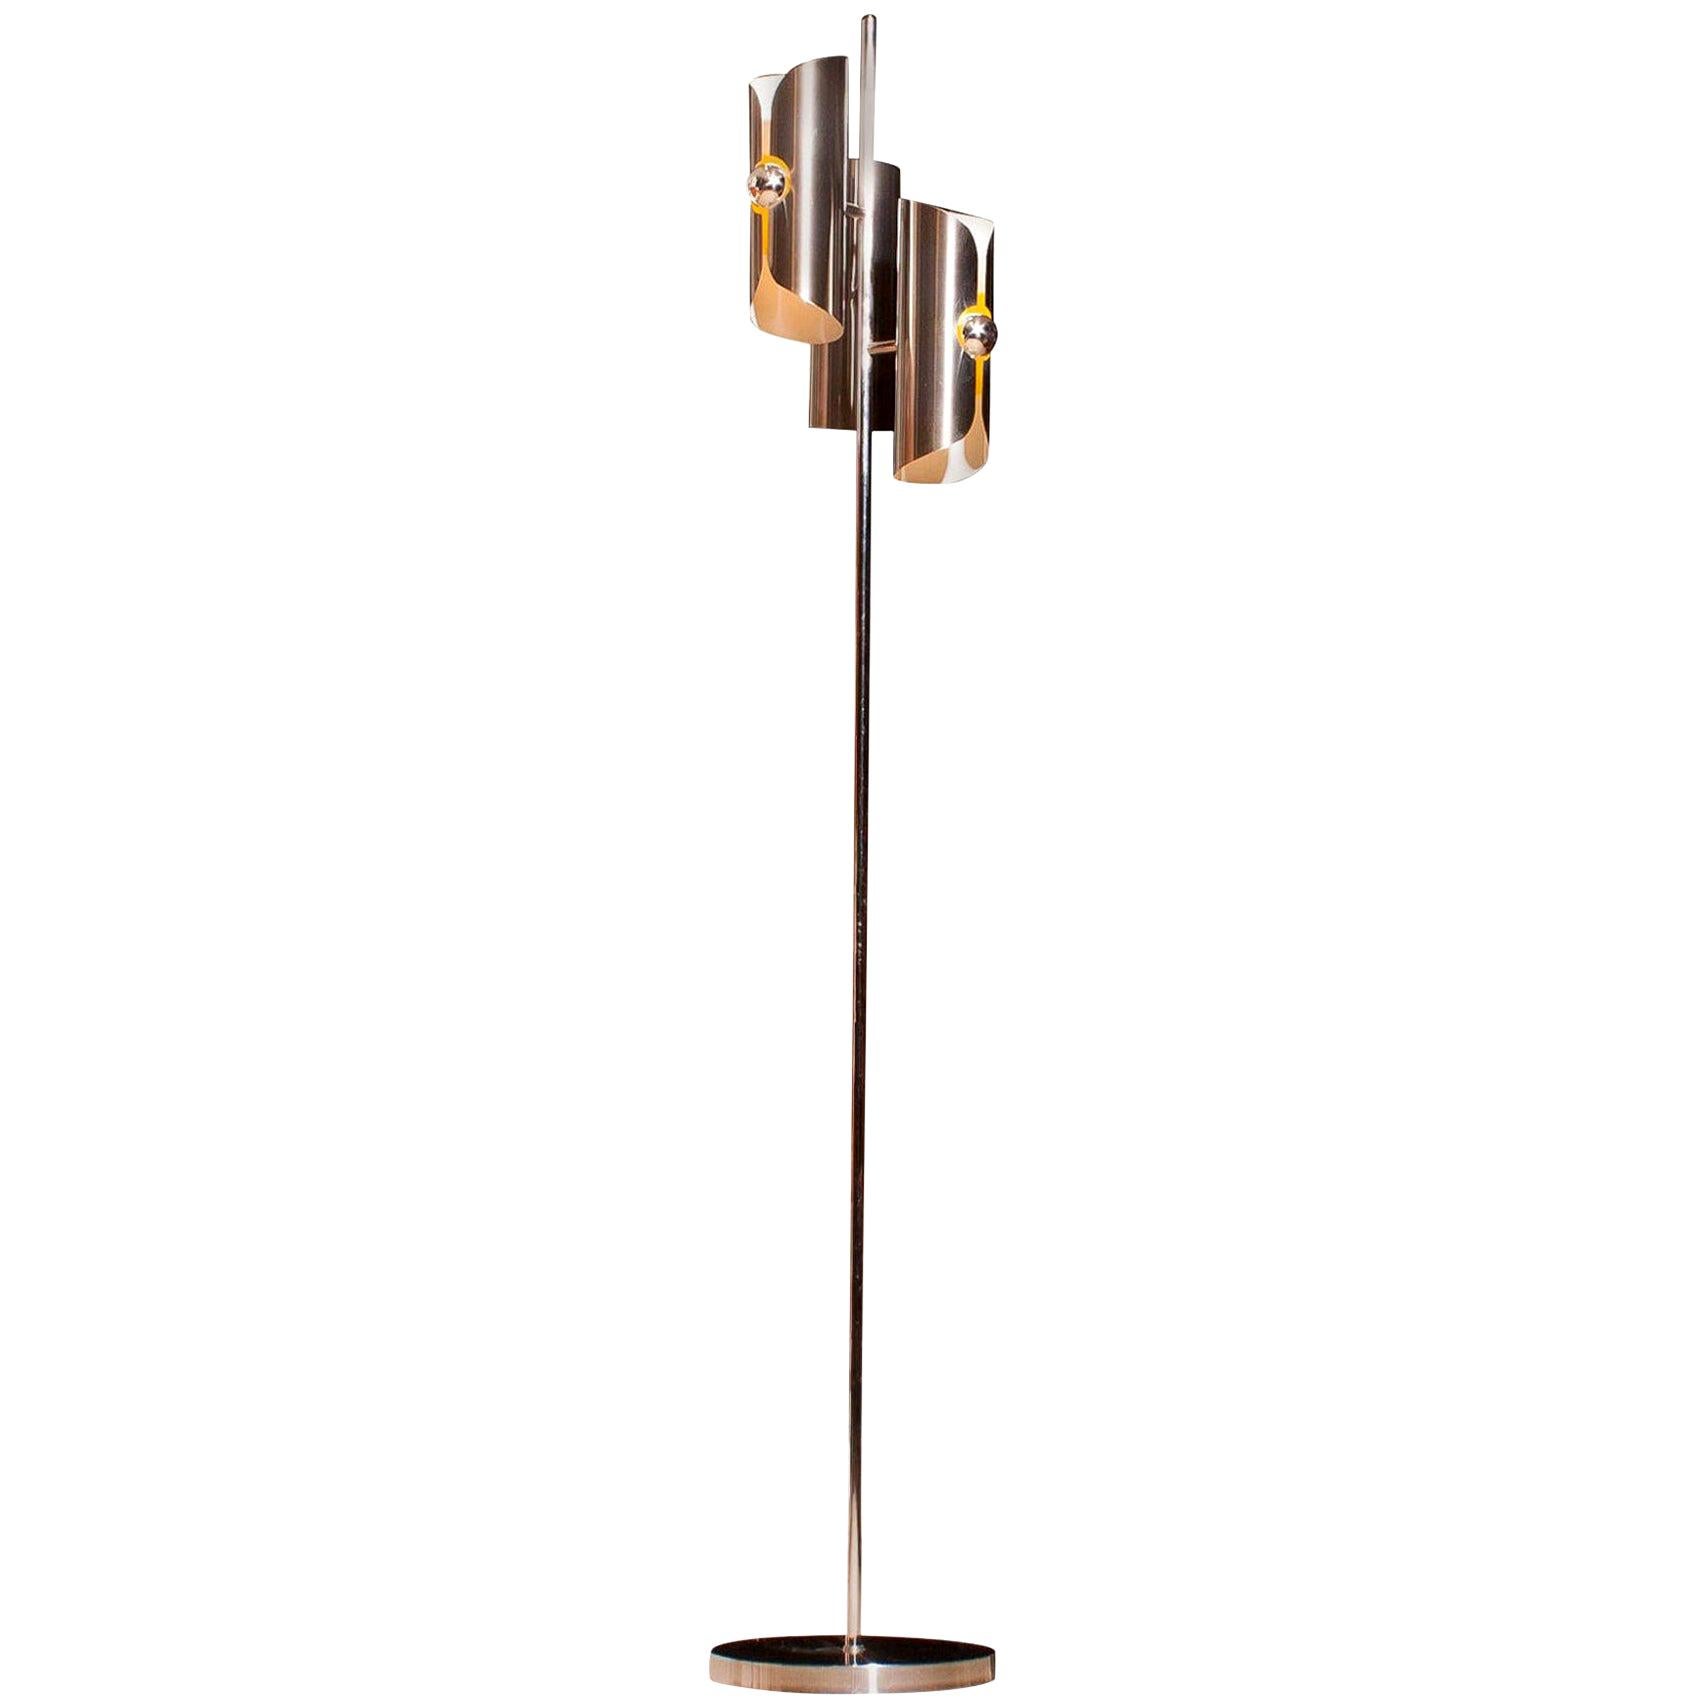 Beautiful 1970 Italian floor lamp in chrome and steel combined with a total height of 160 cm.
The shades are fixed and made of brushed steel.
The shades are height 28 cm. and Ø 9 cm.
Inside the shades are white lacquered and in the middle part is